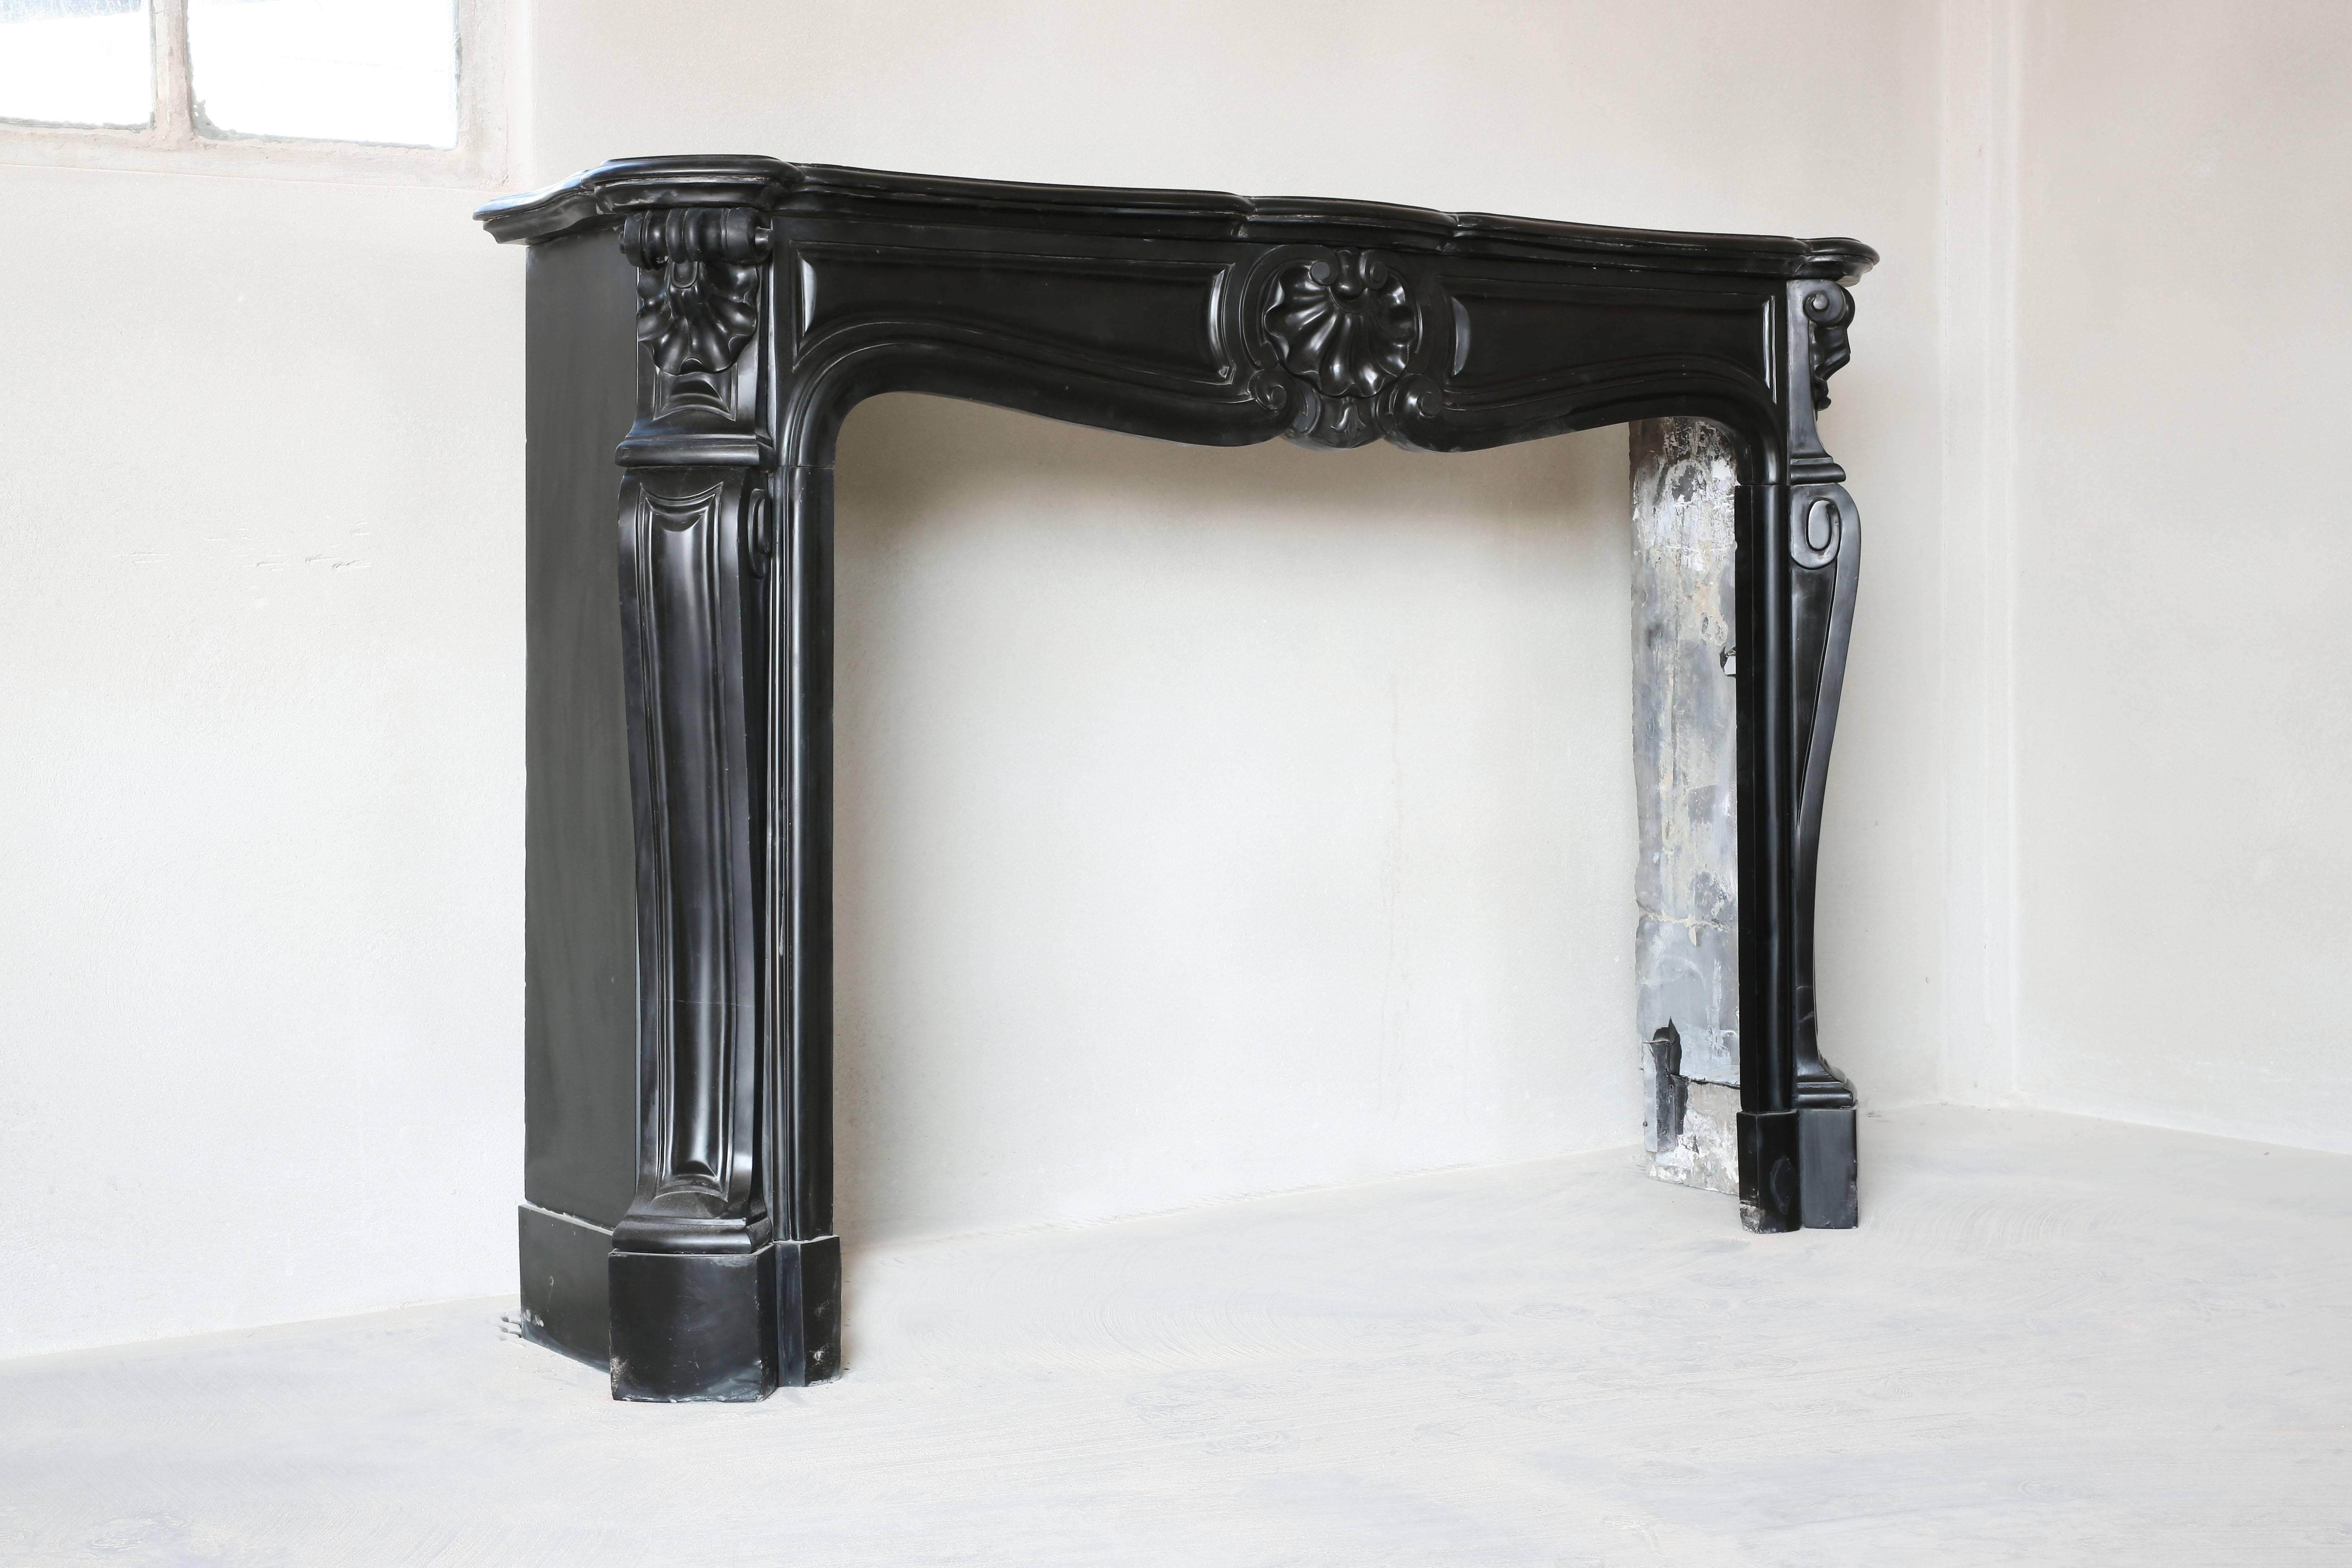 Antique Noir de Mazy fireplace from Belgium. Very nice with the coquille in the middle of the front and on both sides of the legs.